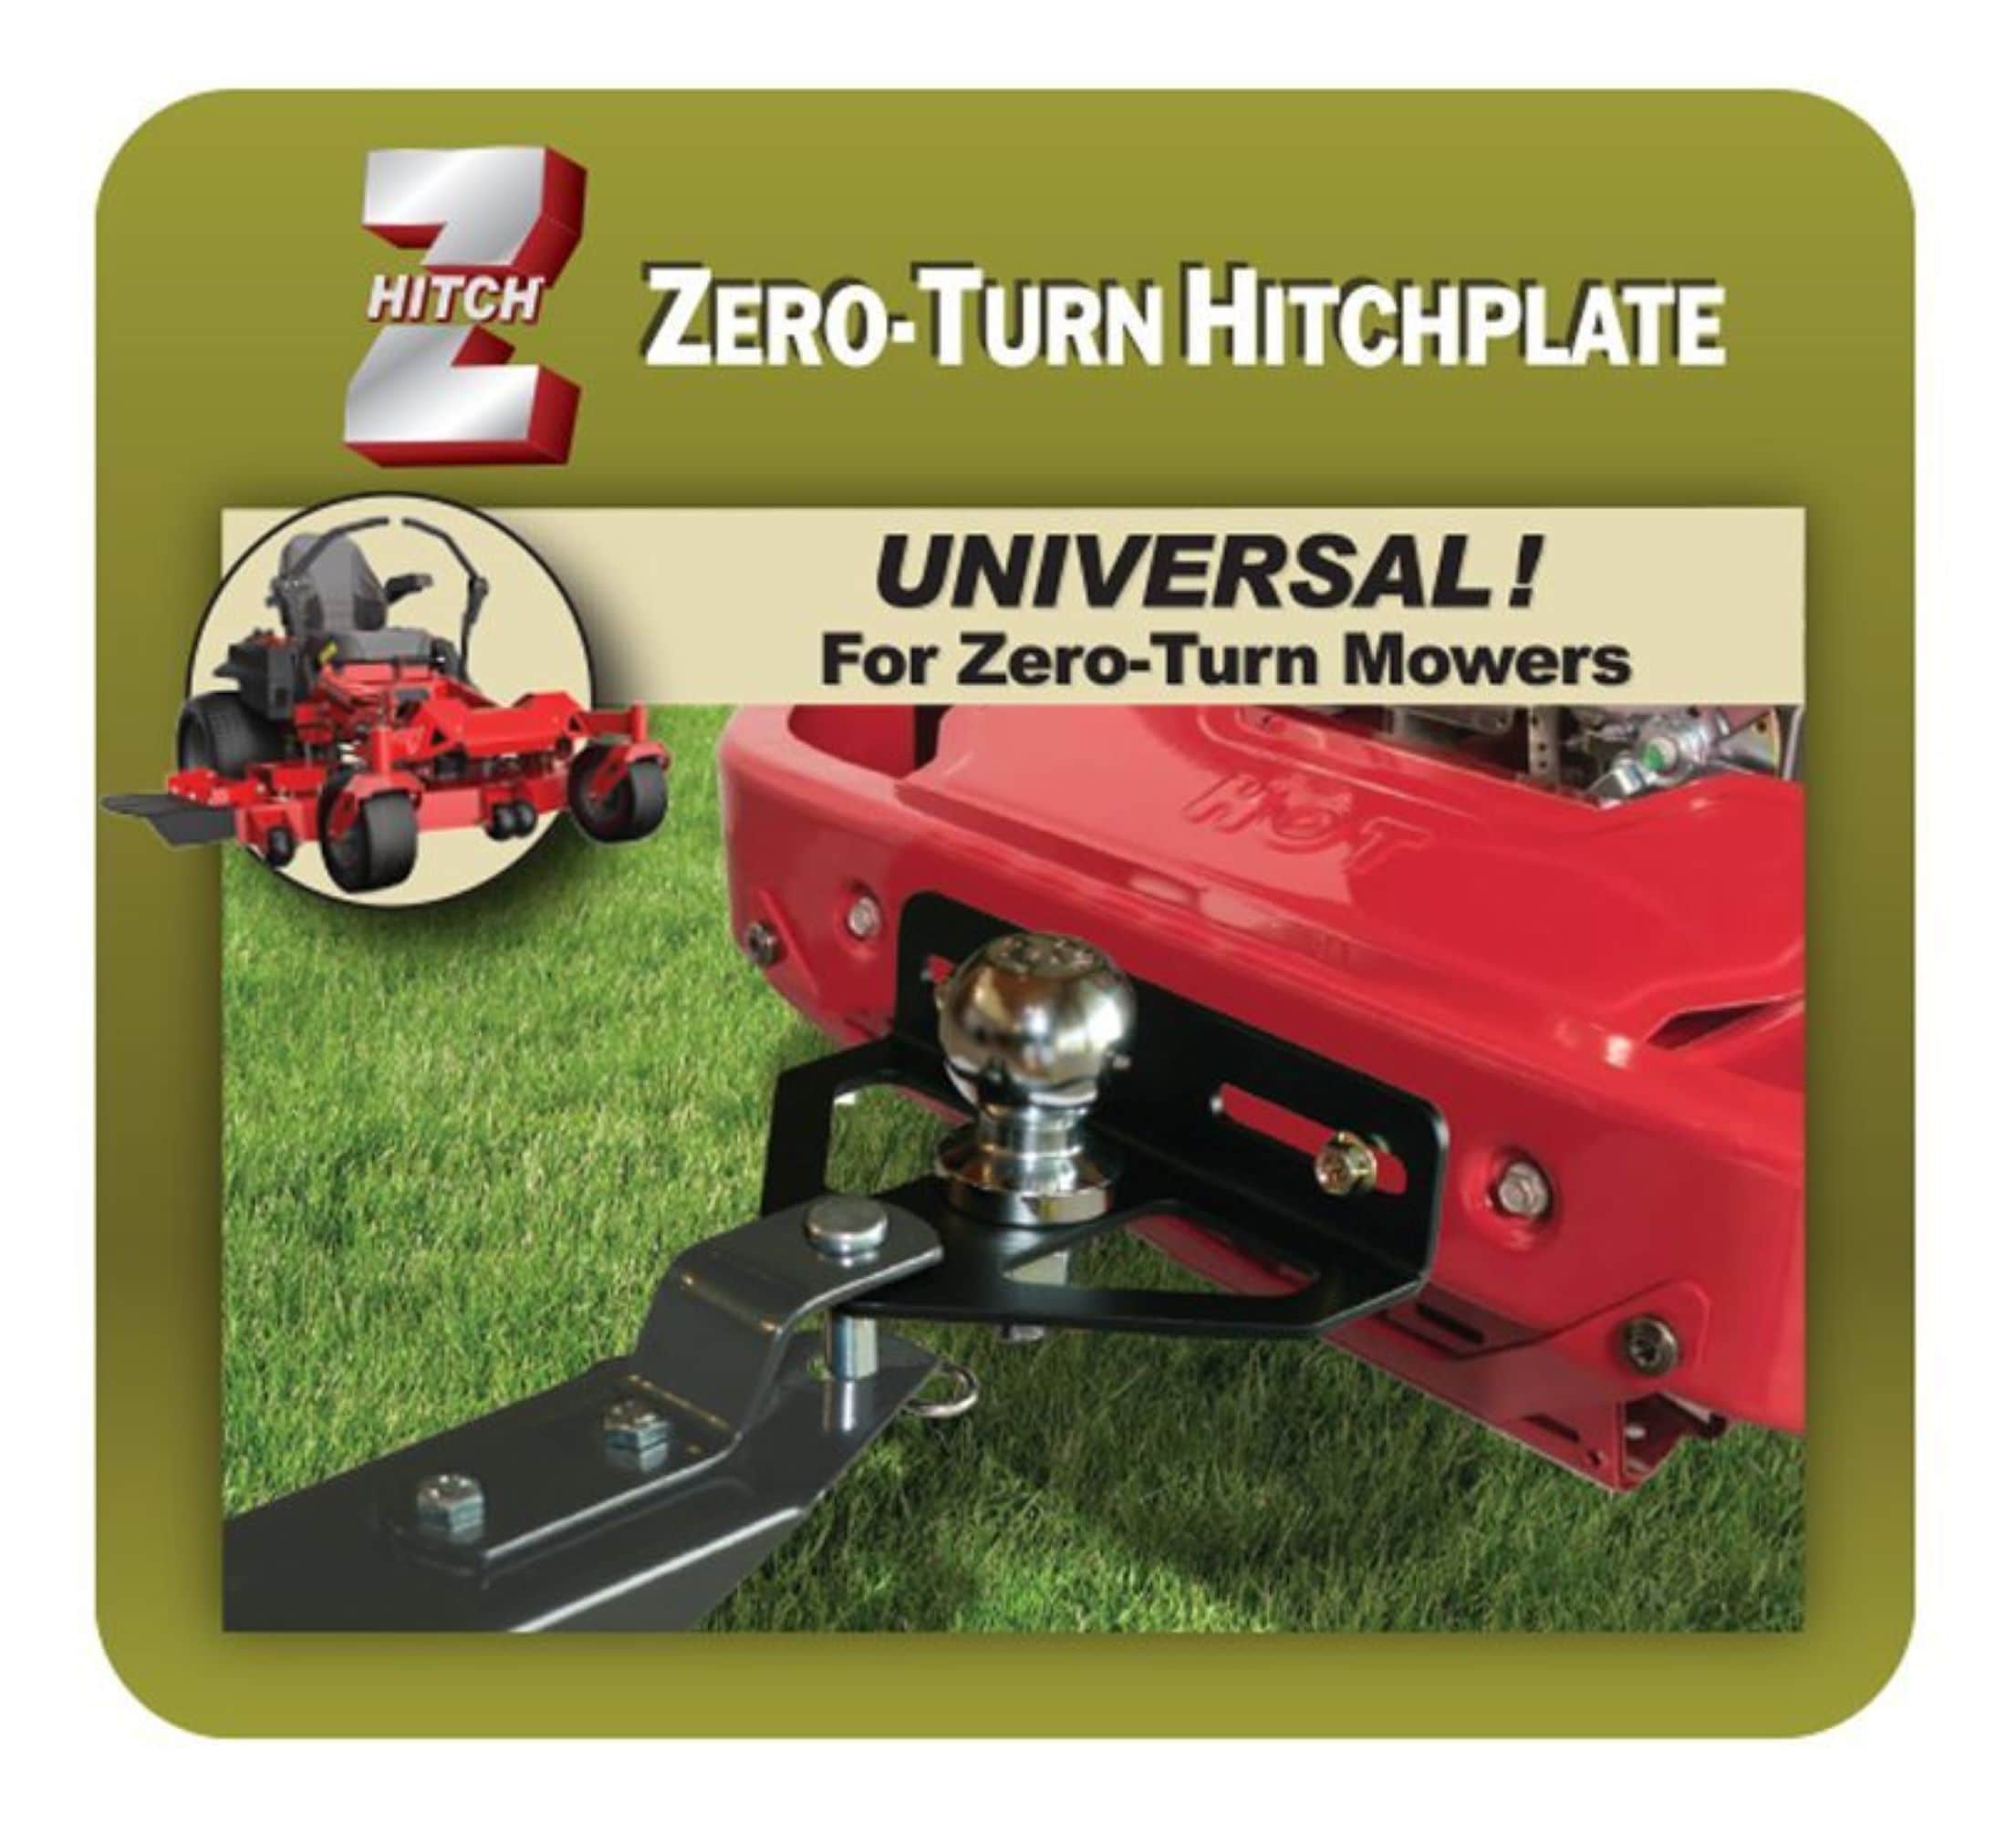 Hitch kit Lawn Mowers at